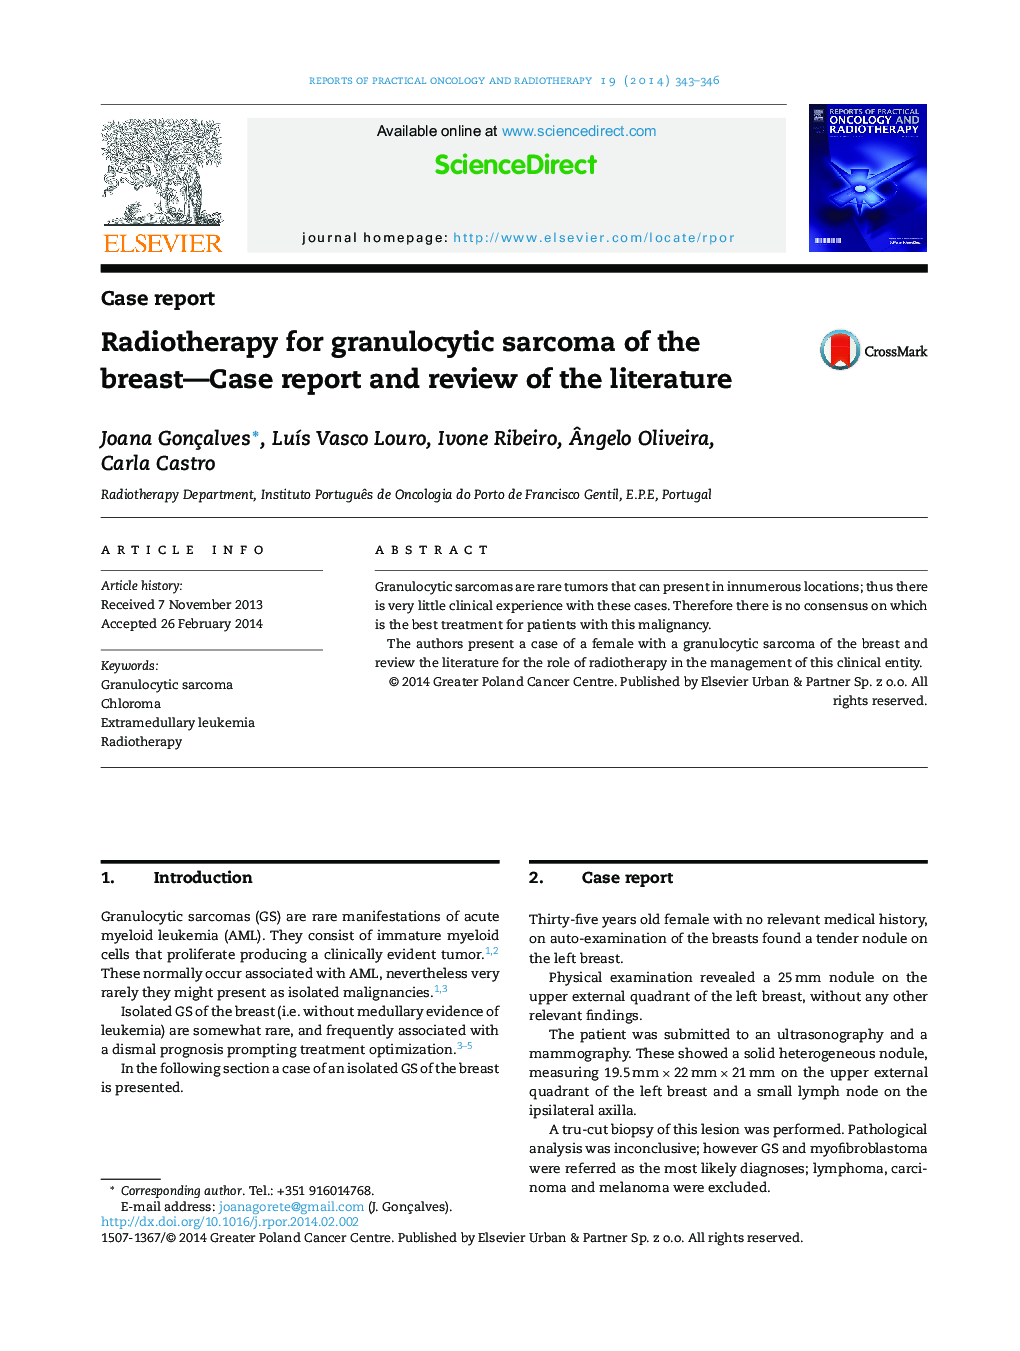 Radiotherapy for granulocytic sarcoma of the breast-Case report and review of the literature